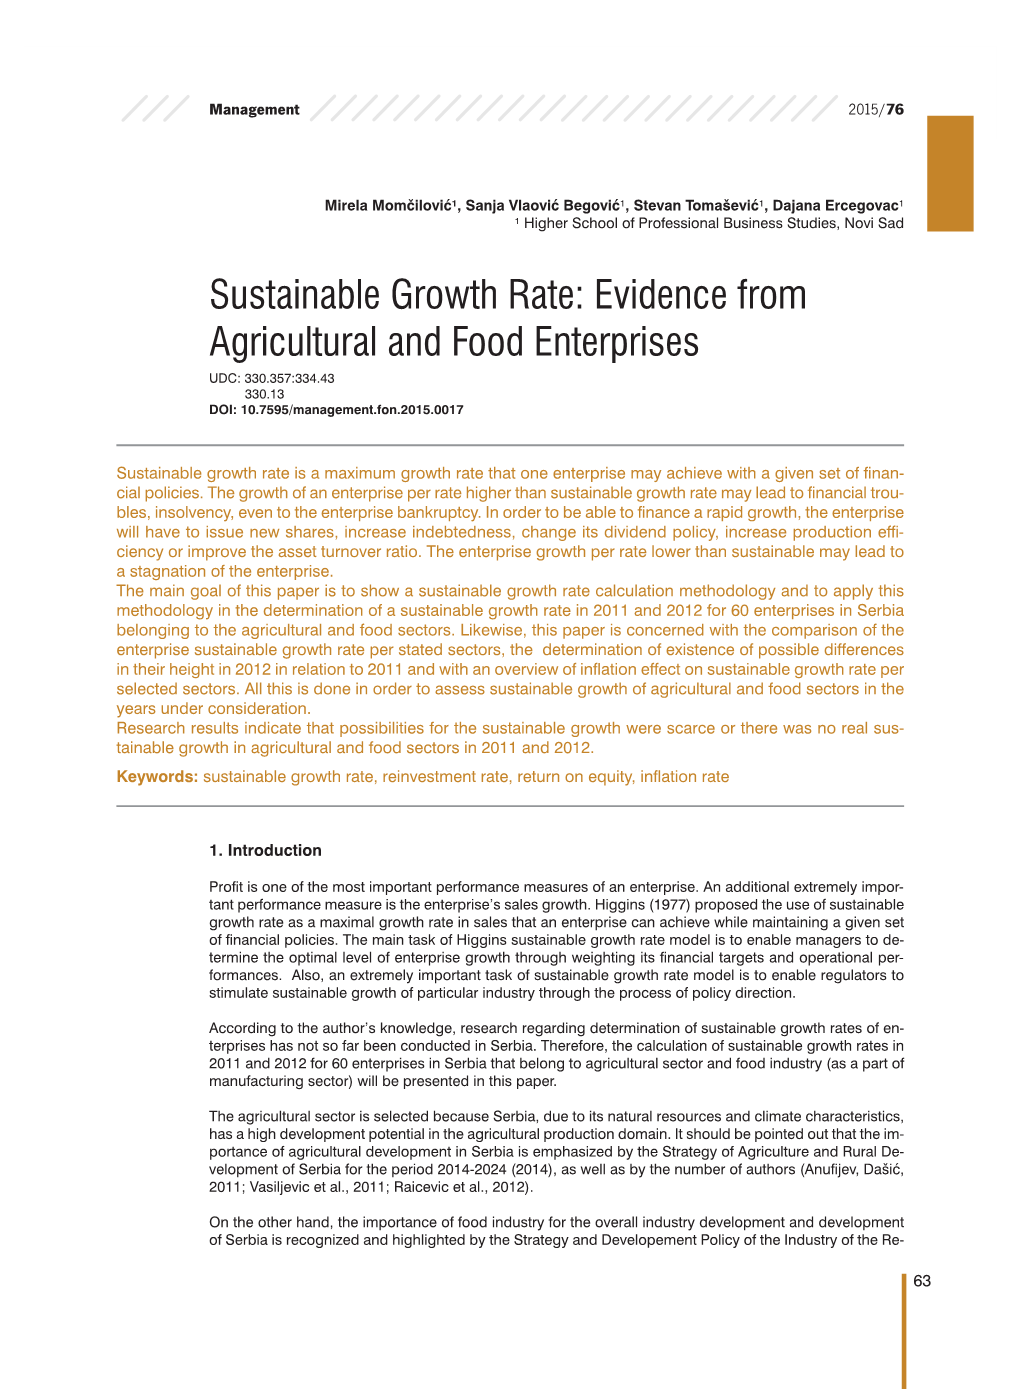 Sustainable Growth Rate: Evidence from Agricultural and Food Enterprises UDC: 330.357:334.43 330.13 DOI: 10.7595/Management.Fon.2015.0017